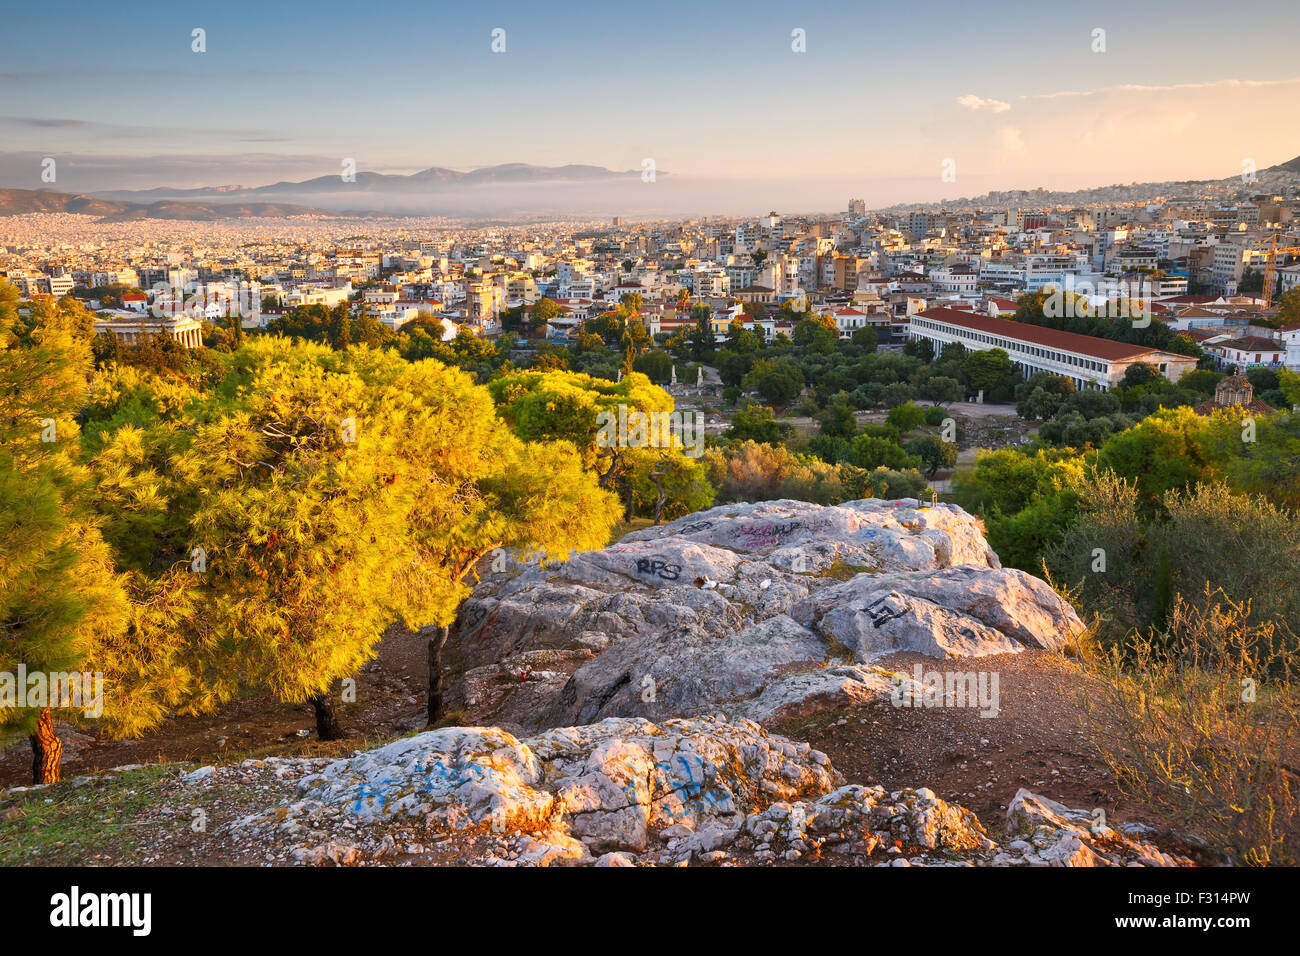 View of Agora and Athens from Areopagus hill. Stock Photo